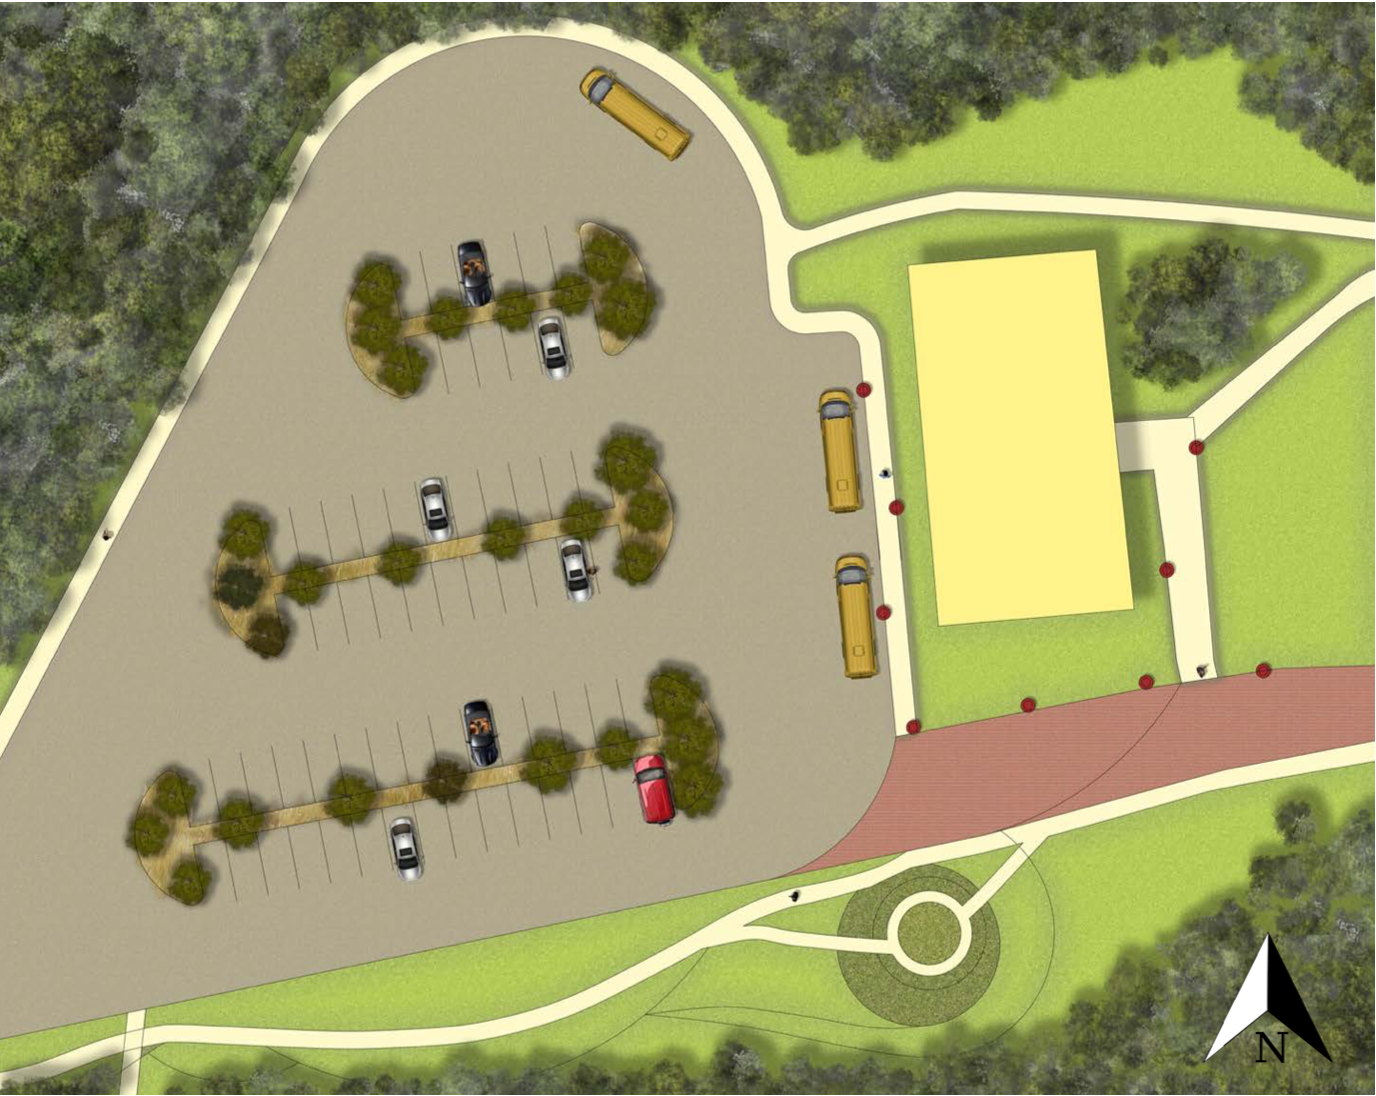 Detailed plan view of the proposed parking lot